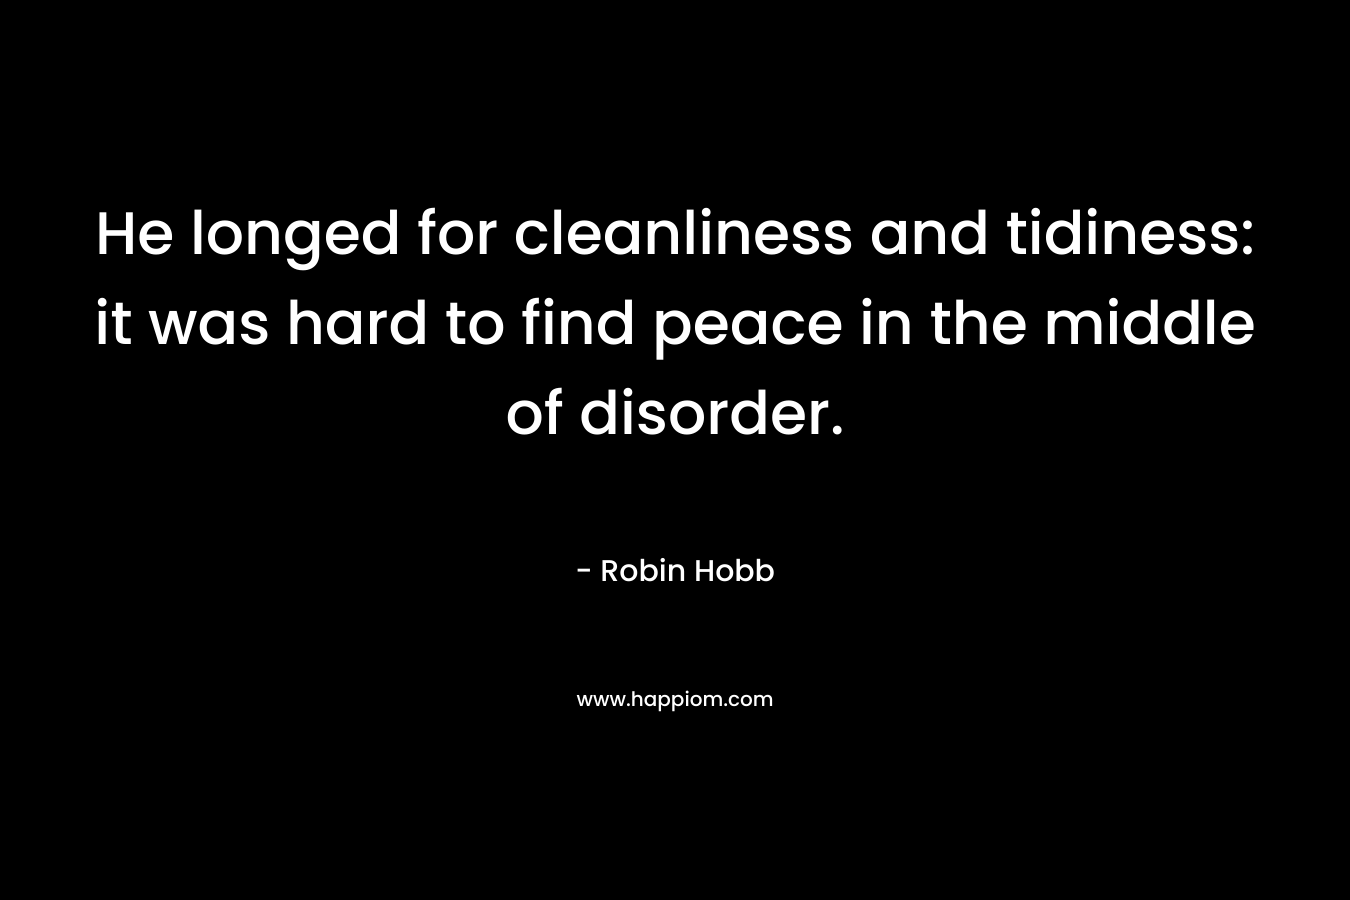 He longed for cleanliness and tidiness: it was hard to find peace in the middle of disorder. – Robin Hobb